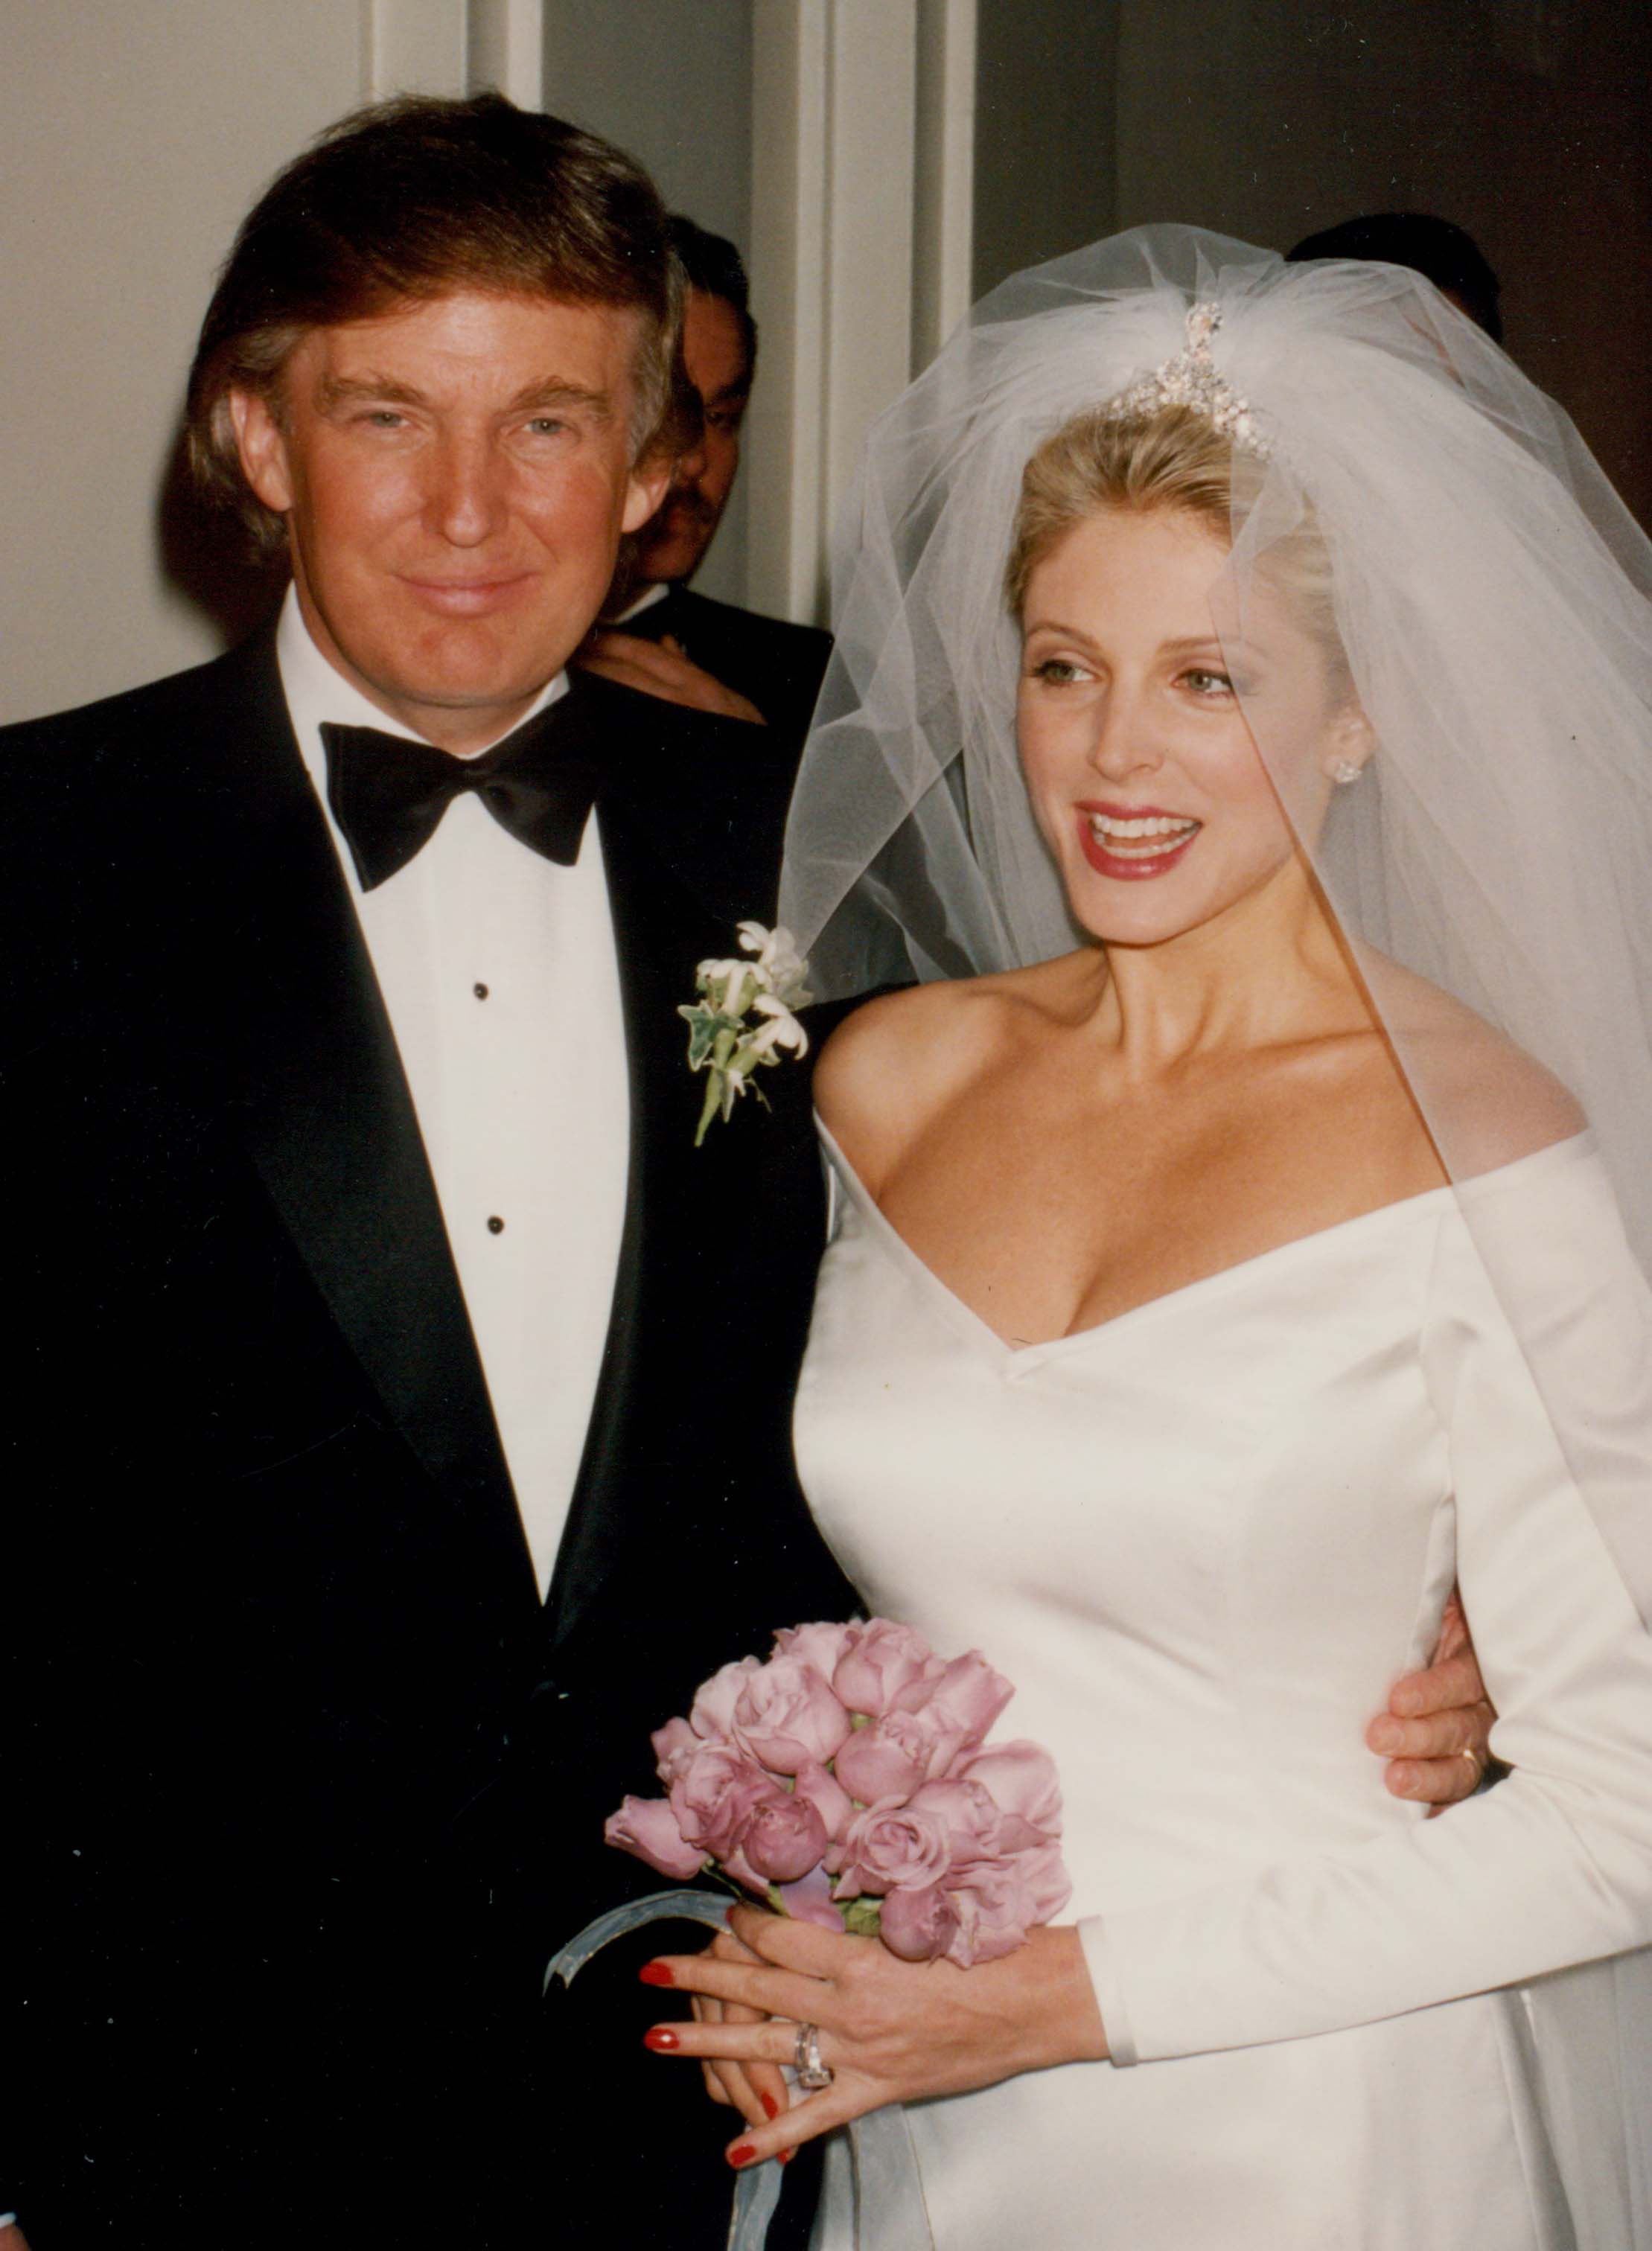 <p>Donald Trump and Ivana Trump's marriage of 13 years came to an end in 1991 when he was caught cheating with Marla Maples (pictured). He made headlines again after news of Ivana's settlement broke: She reportedly walked away from the marriage with $10 million, a $12 million mansion and custody of their three kids. Donald kept Marla… for another seven years.</p>